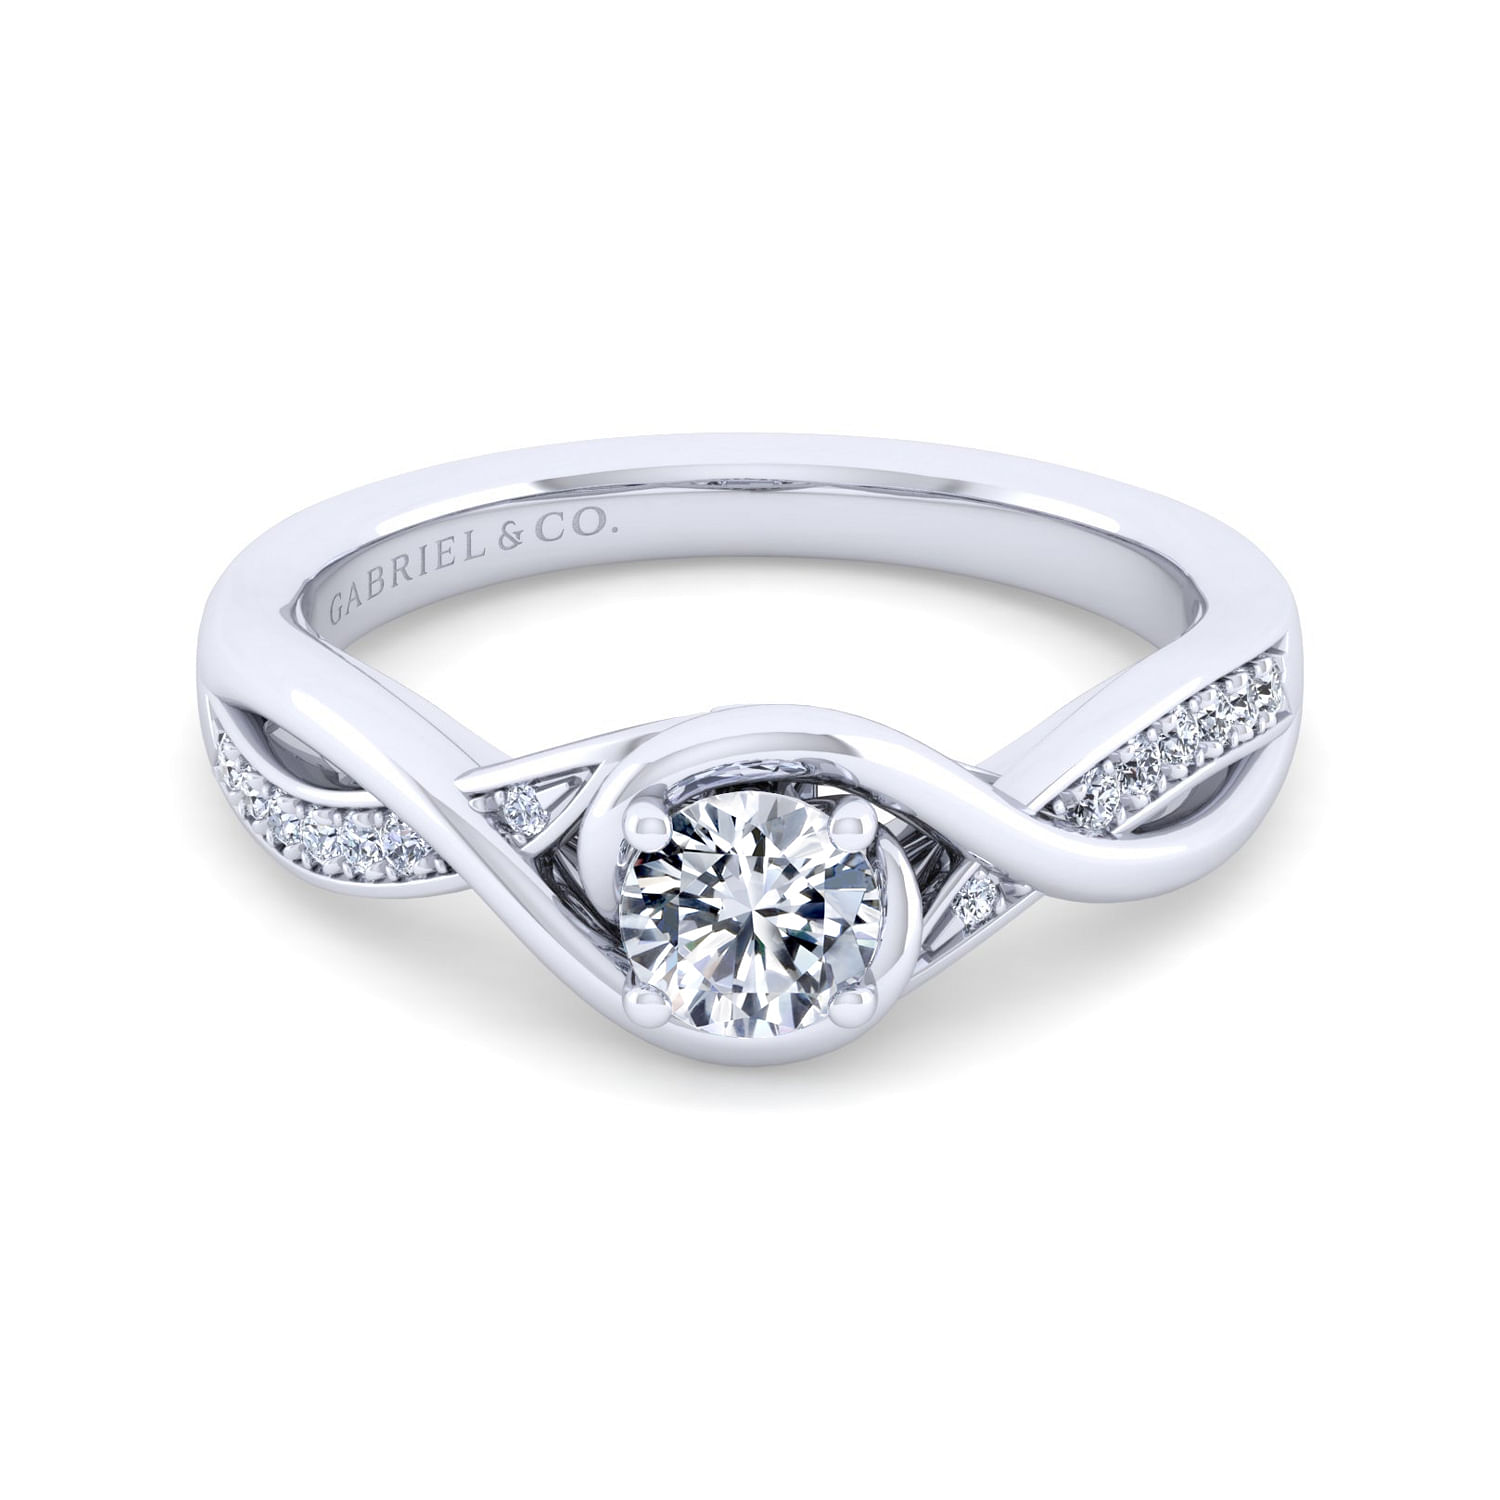 Bailey - 14K White Gold Round Twisted Diamond Engagement Ring